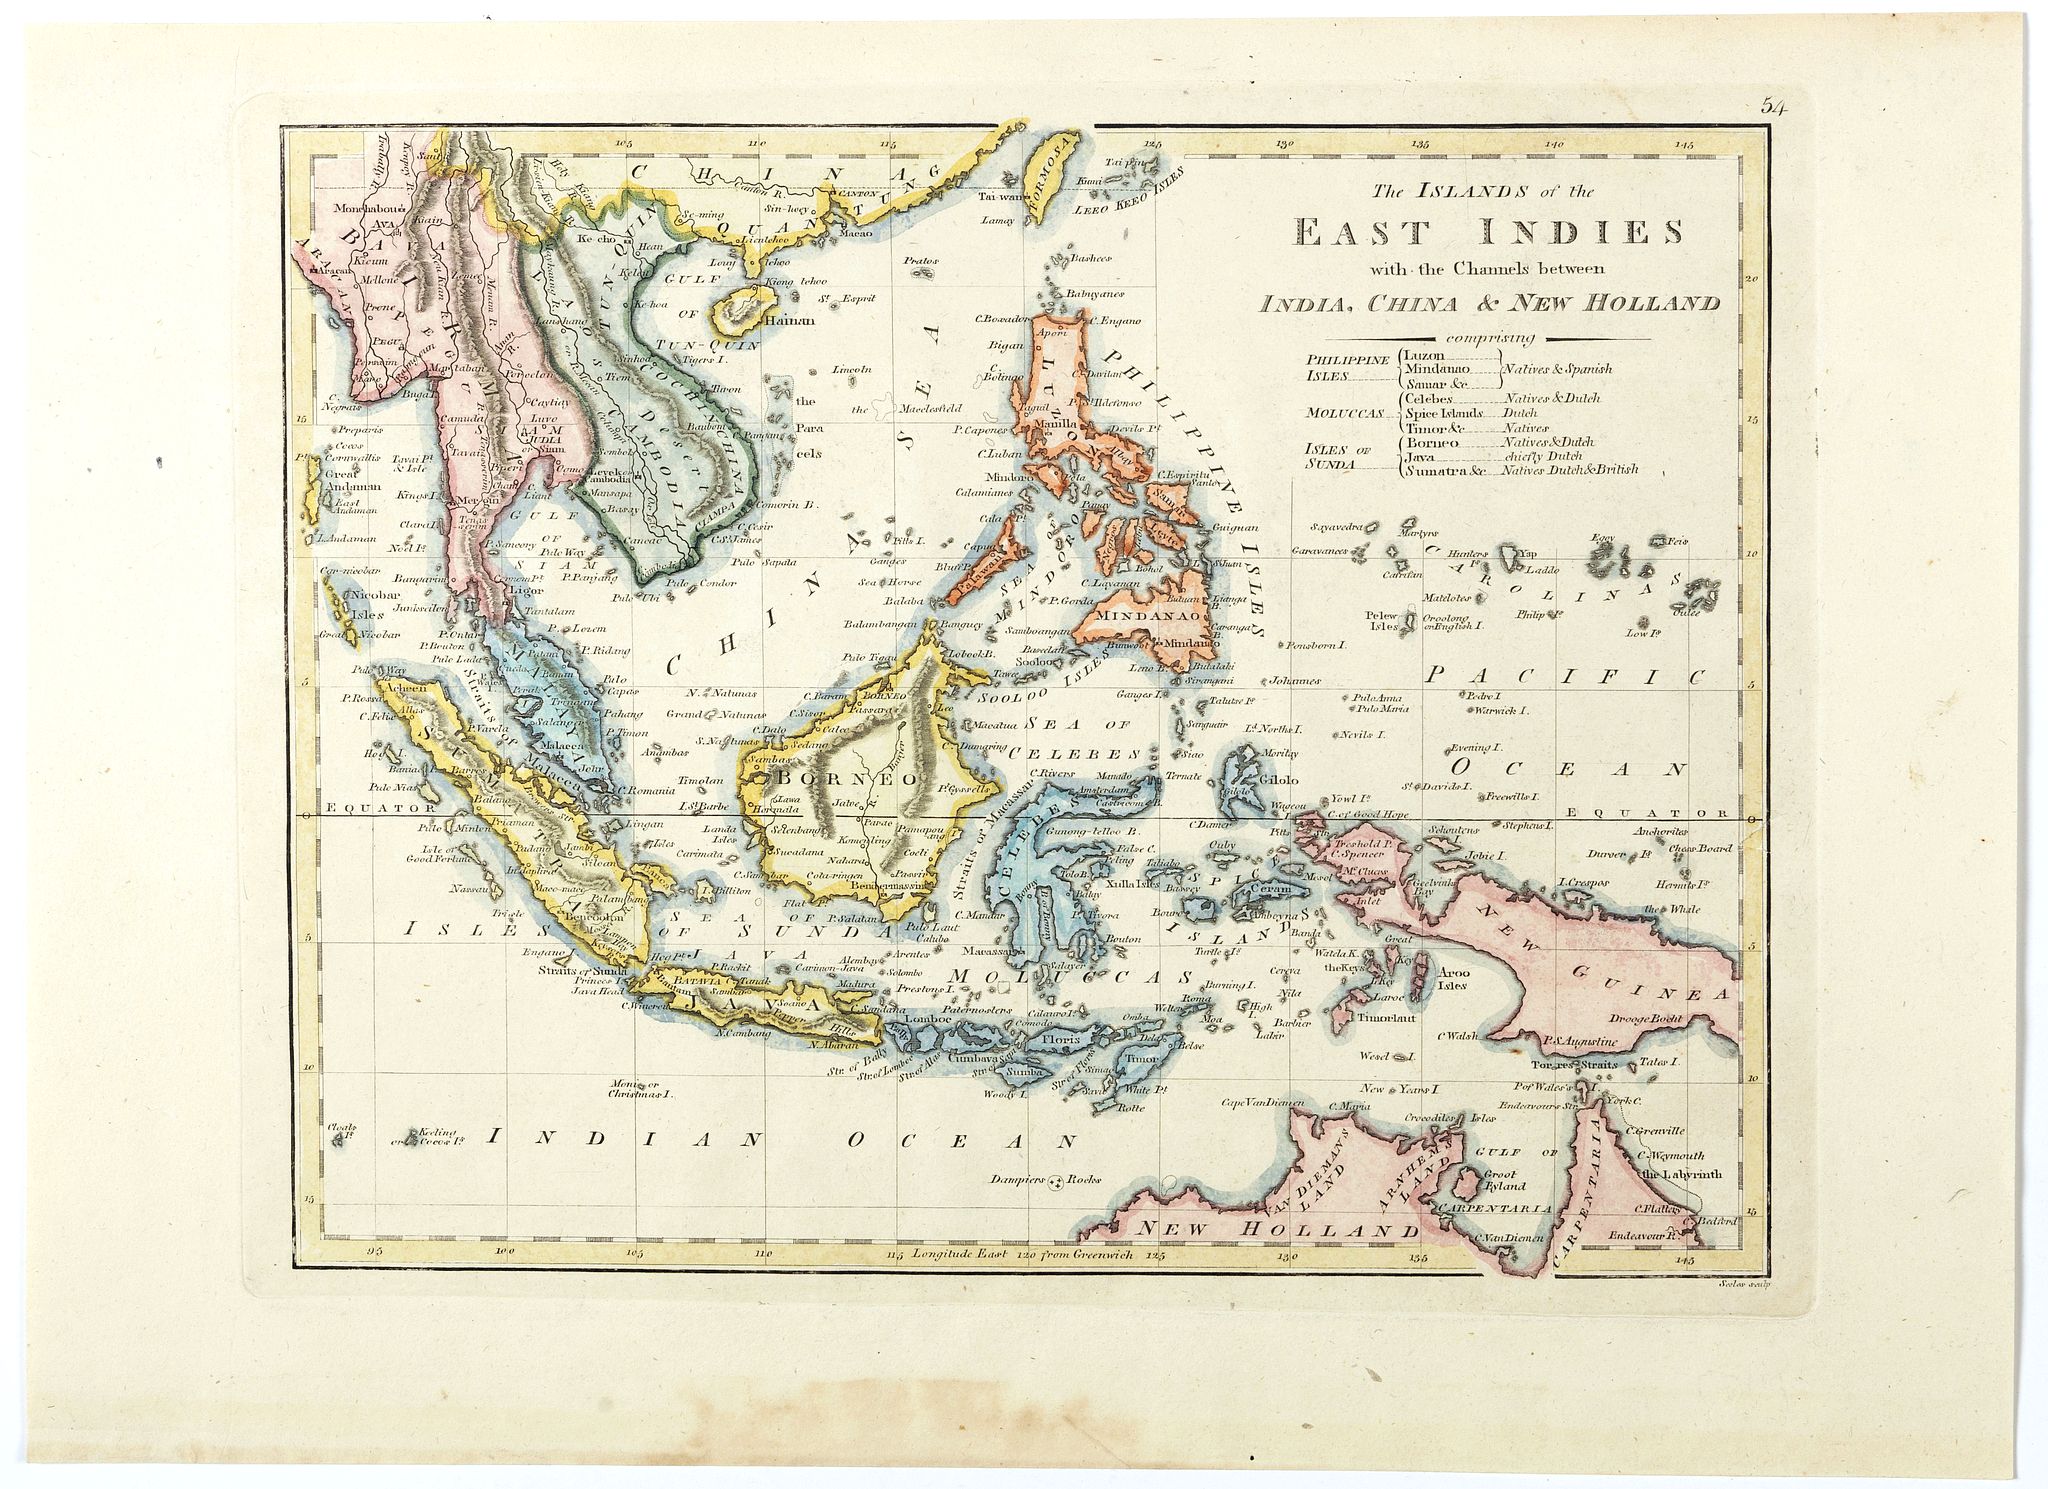 The Islands of the East Indies with the Channels between India, China & New Holland